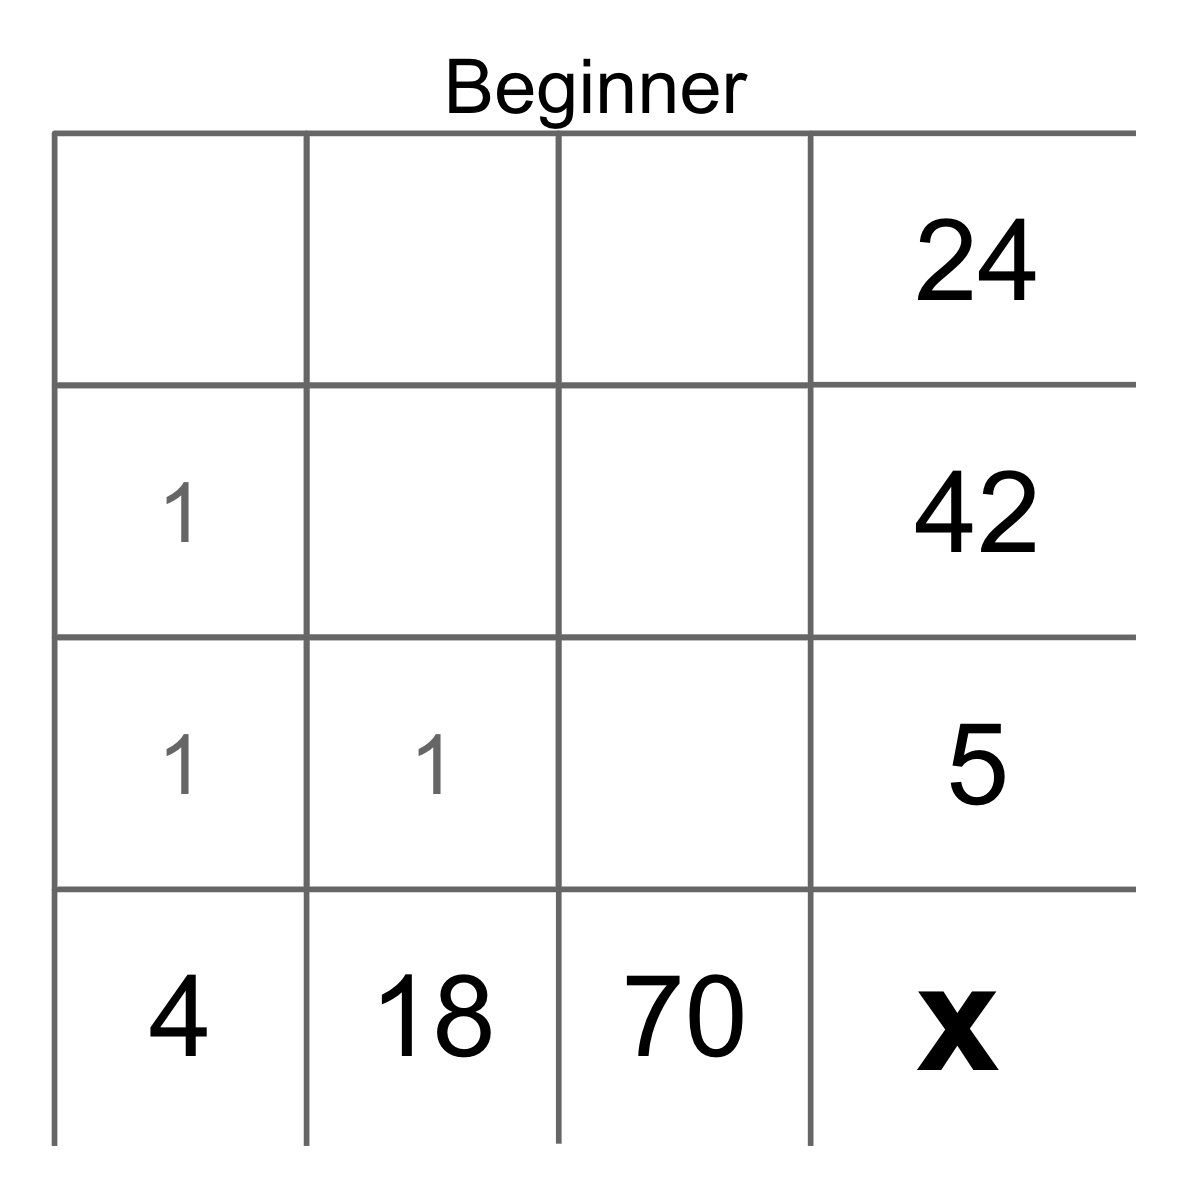 A beginner difficulty three-by-three yohaku puzzle where numbers need to multiply down to the products 4, 18, and 70 (at the bottom), as well as across to the products 24, 42, and 5 (down the right side.) The centre left, bottom left, and bottom middle digits have all been filled in as 1's.